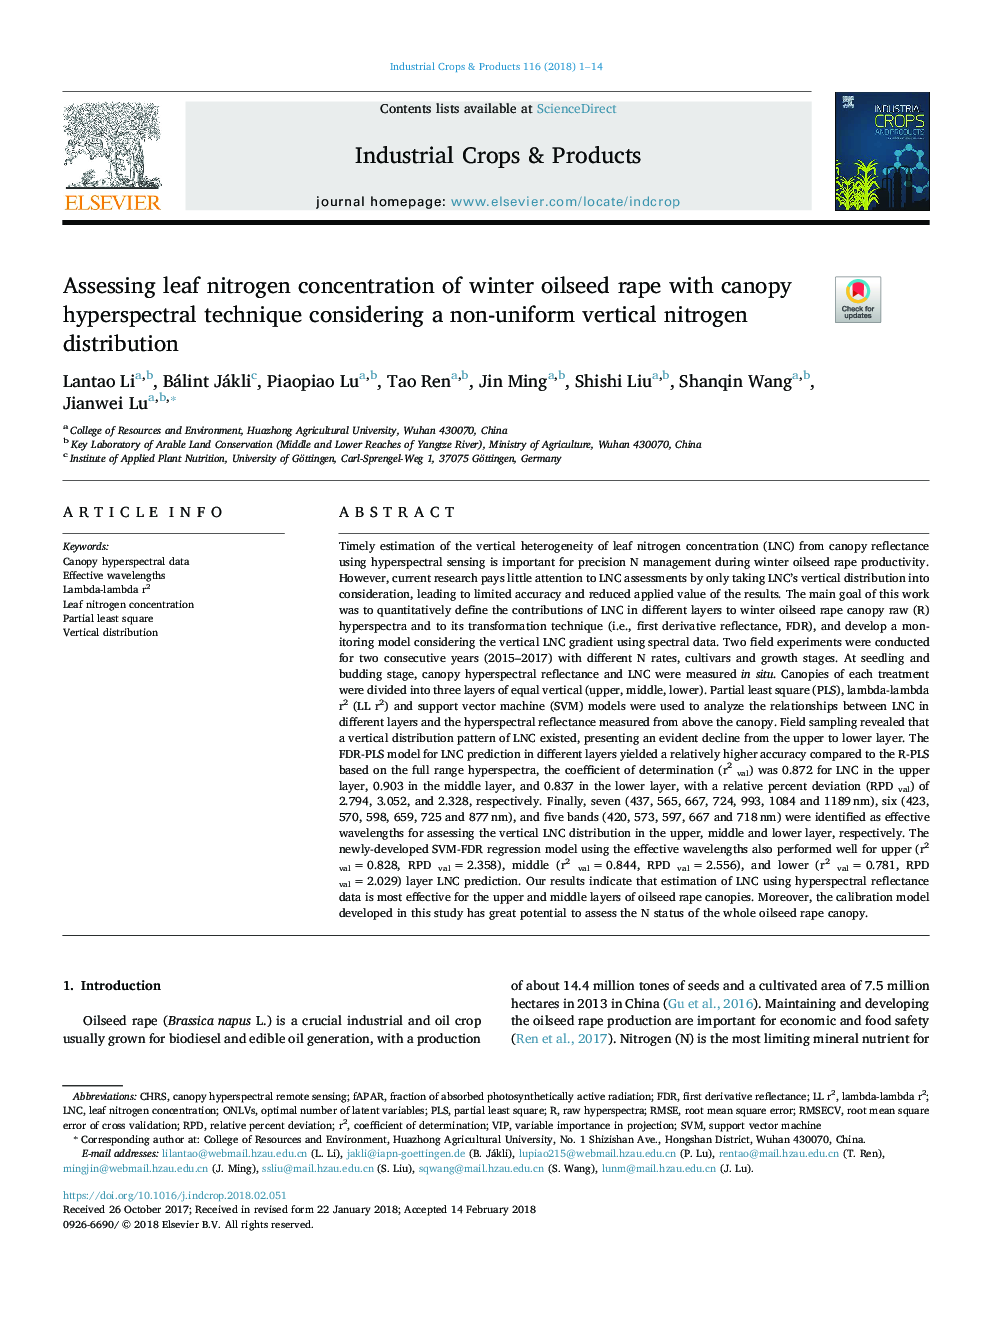 Assessing leaf nitrogen concentration of winter oilseed rape with canopy hyperspectral technique considering a non-uniform vertical nitrogen distribution